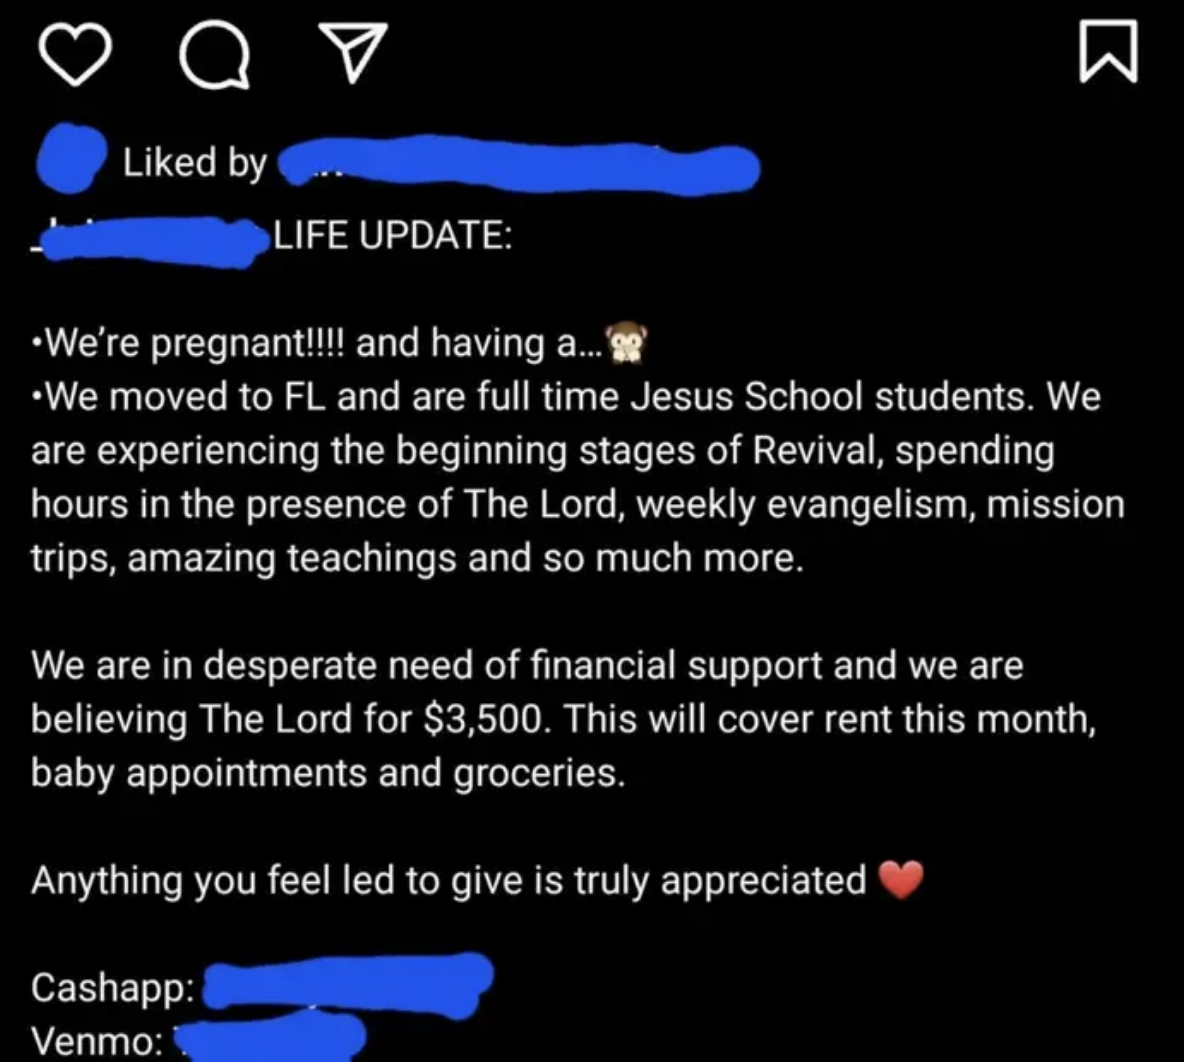 The post says they are pregnant but both soon-to-be parents are students at Jesus School, so can&#x27;t afford rent and baby support, so they request $3,500 from their friends